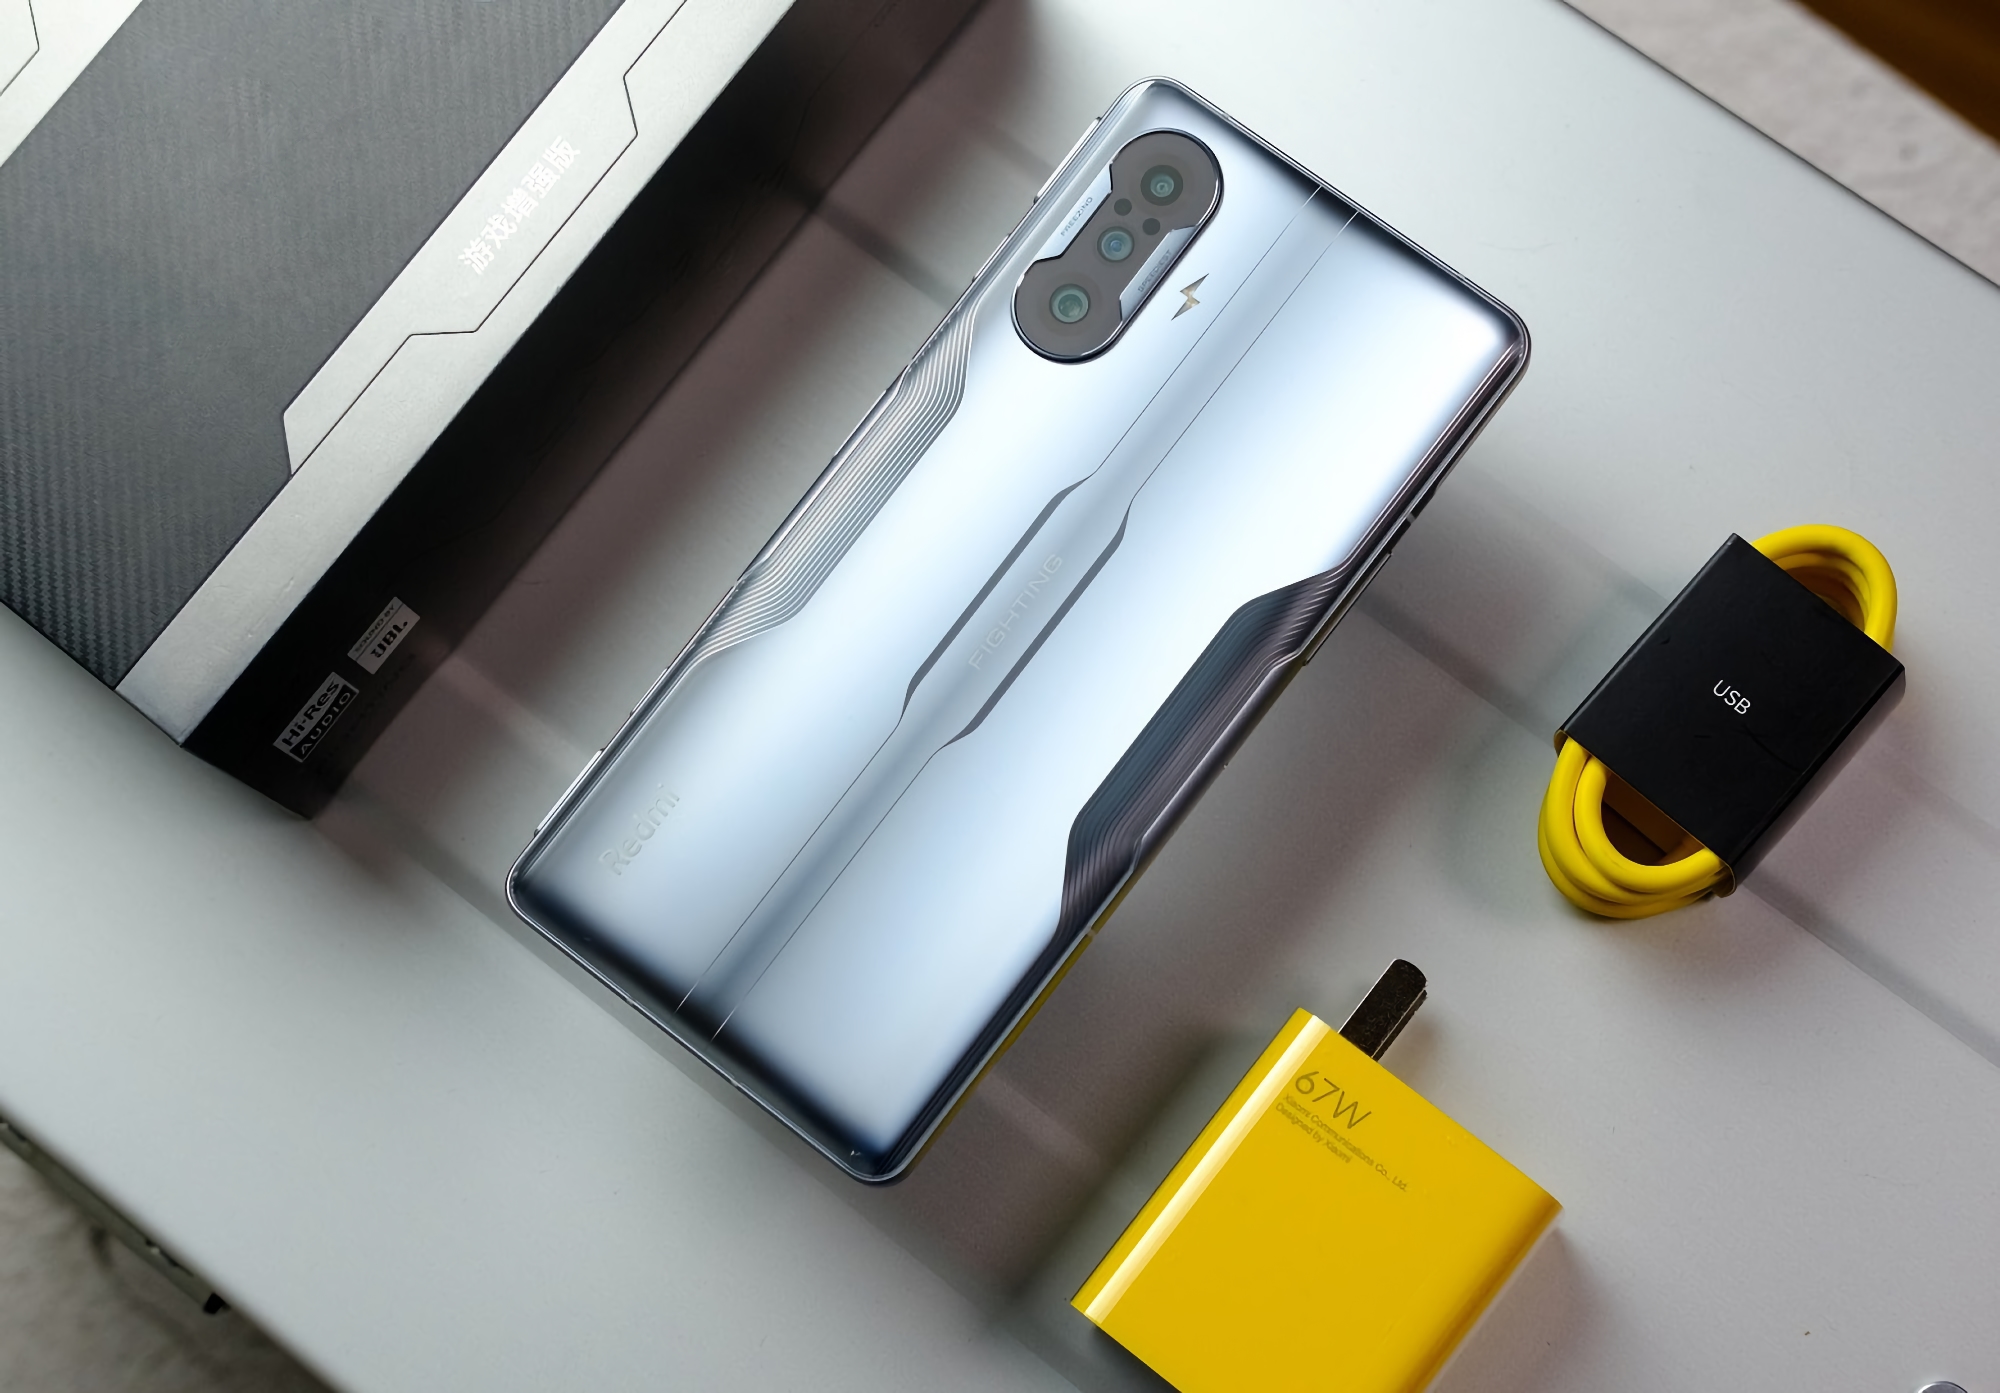 Dimensity 9000 chip, 5000 mAh battery and 64 MP camera: an insider revealed details about the Redmi K50 Gaming gaming smartphone